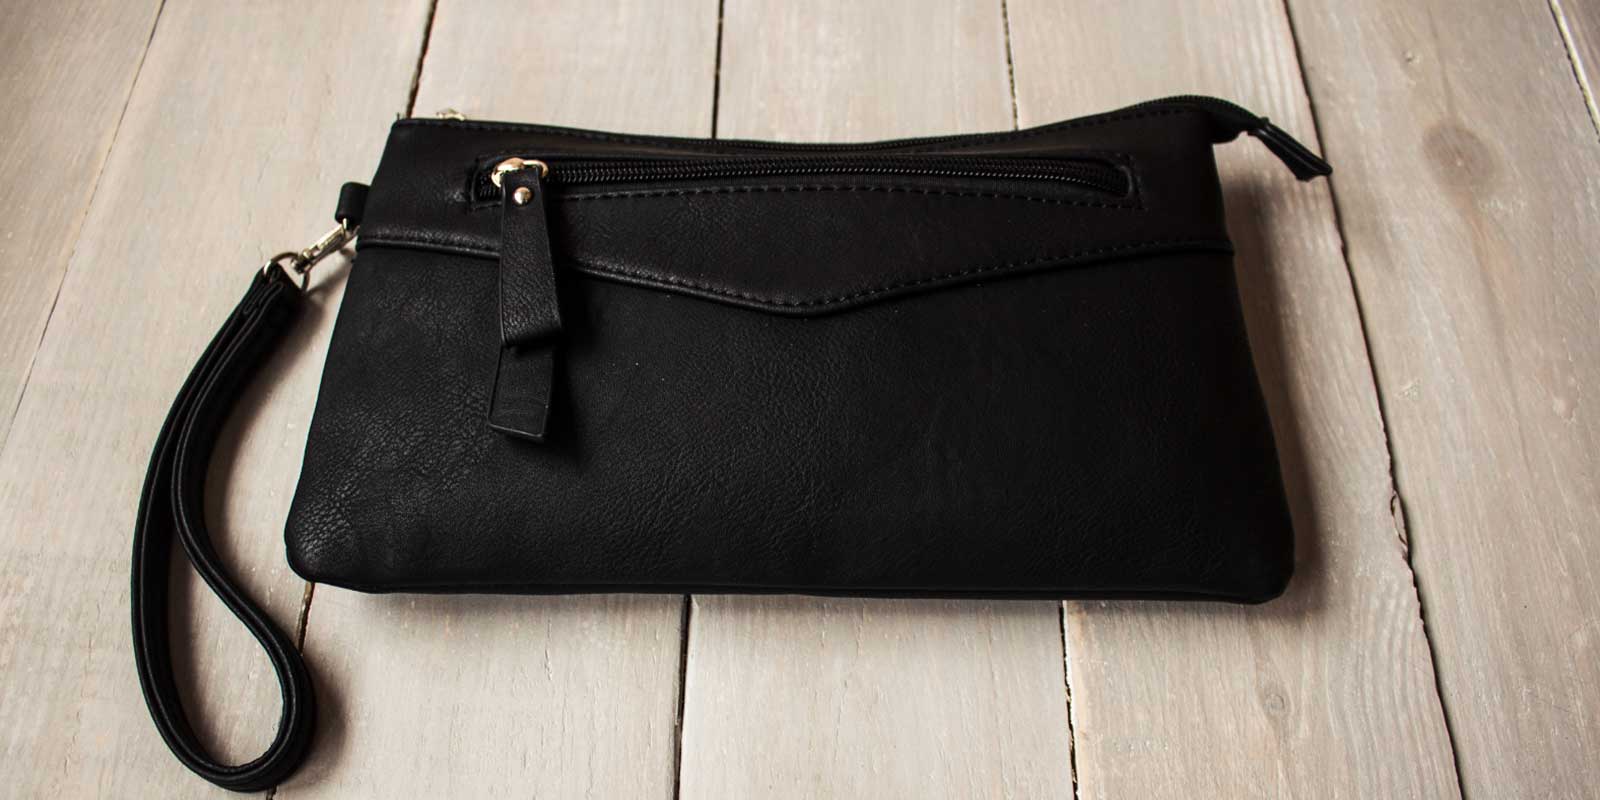 What Are Clutch Bags Used For?